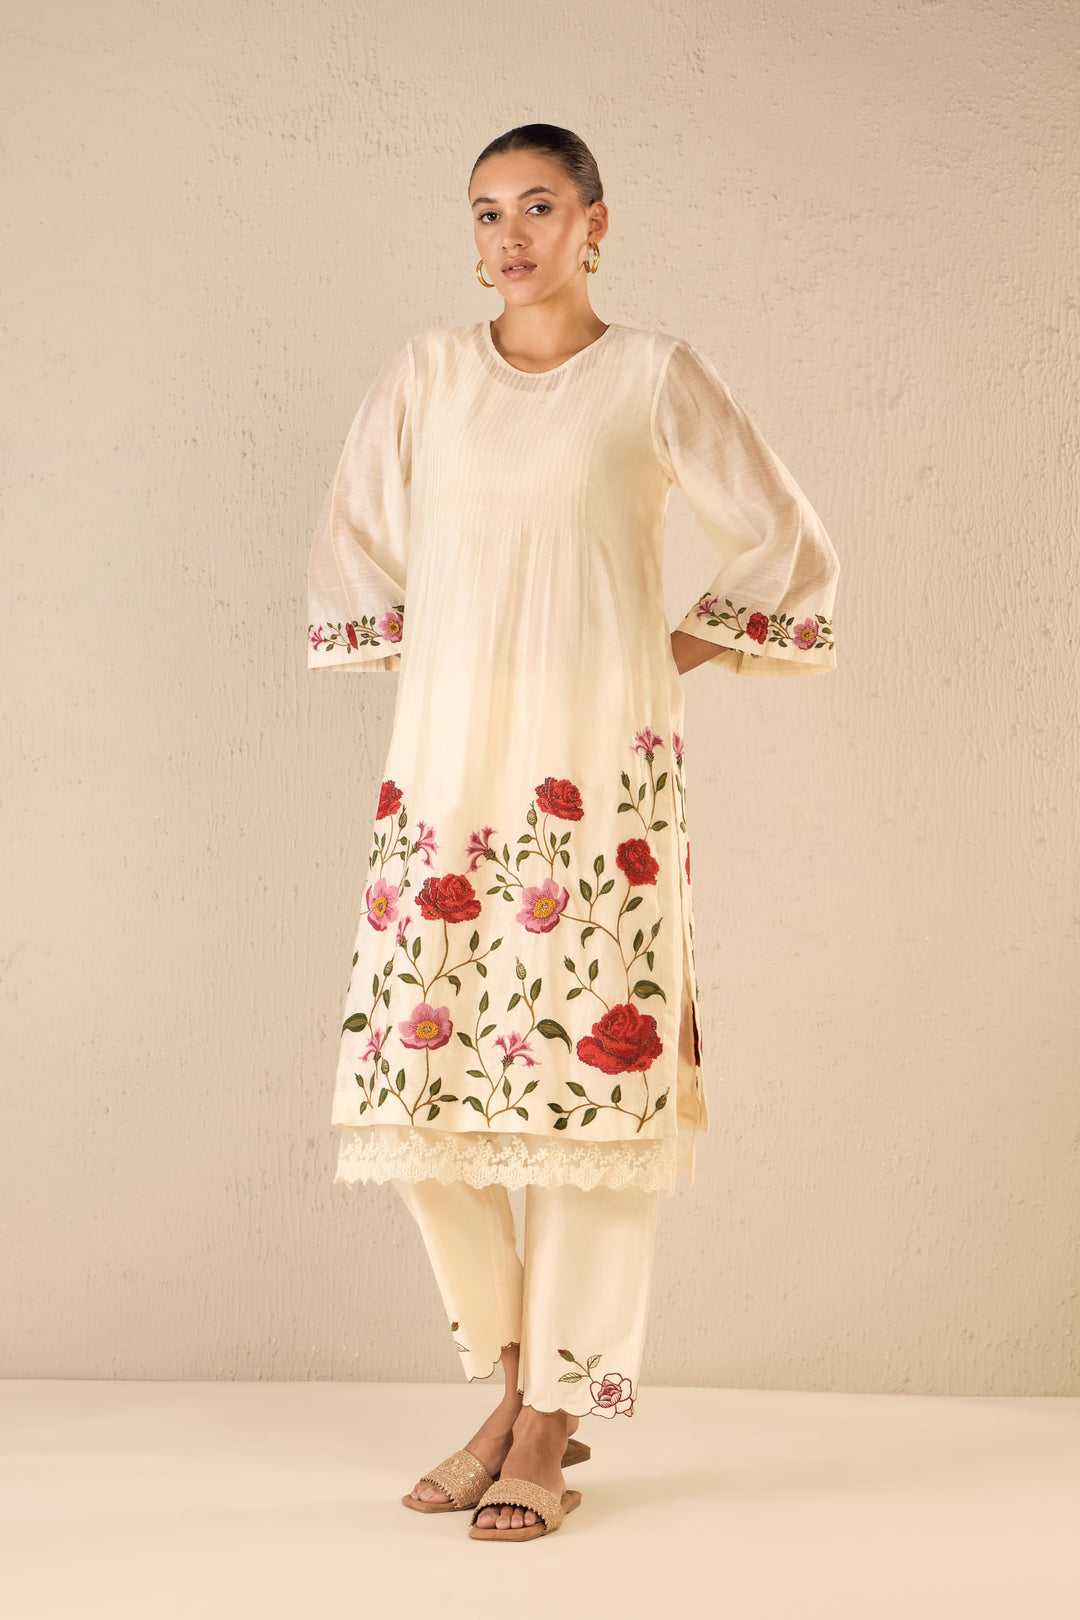 GARDENIA CHARM: IVORY FLORAL EMBRIODERY JAAL KURTA WITH IVORY EMBROIDERY SCALLOPED PANTS & IVORY CHANDERI FLORAL EMBROIDERY SCALLOPED DUPATTA